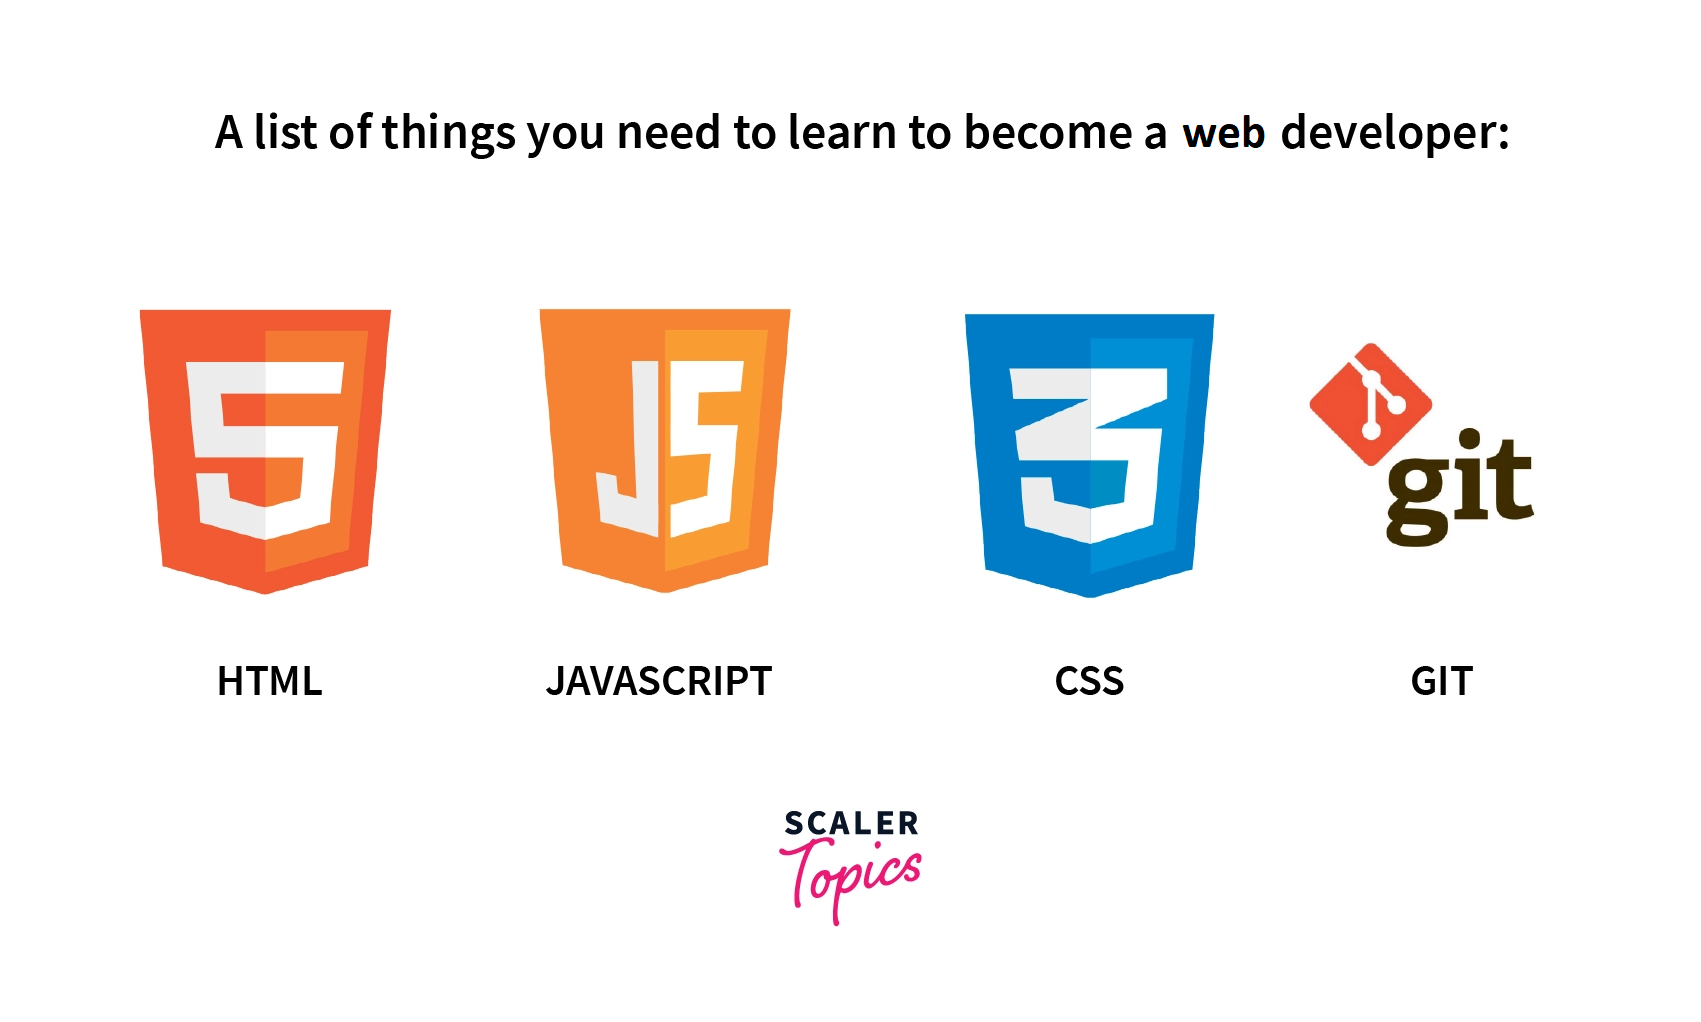 lists of things needed to be a web developer